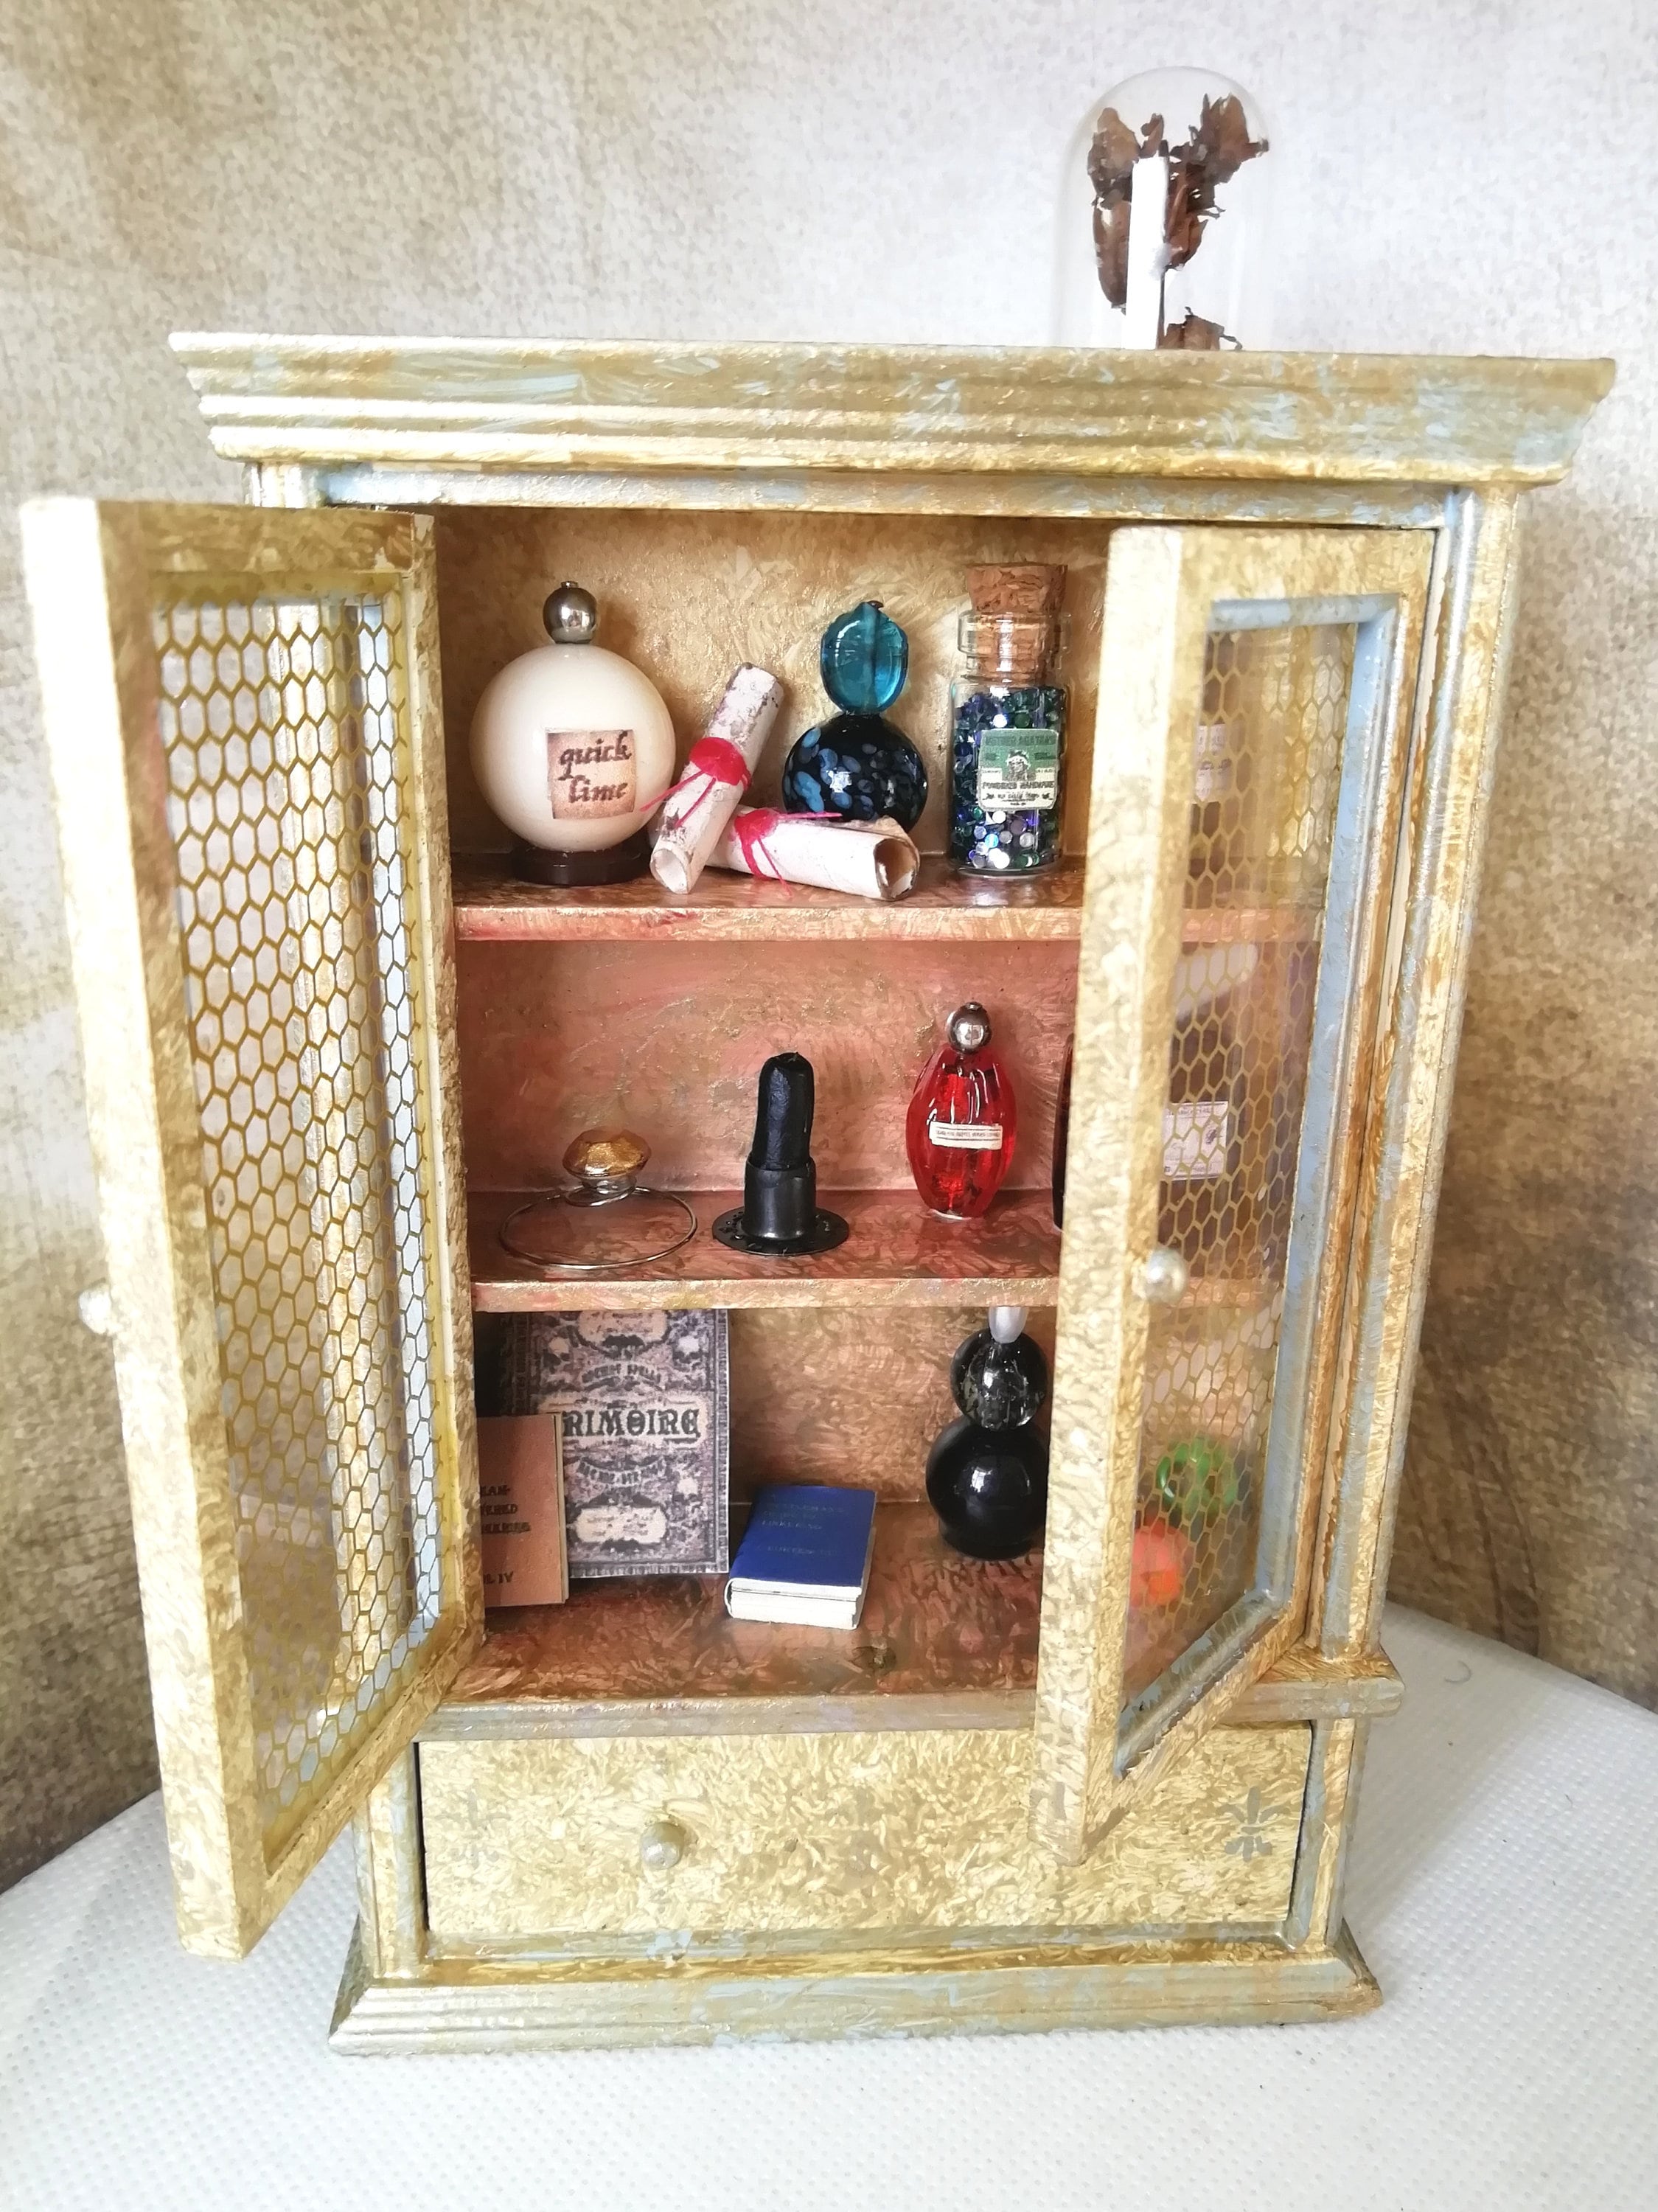 The Best Apothecary Cabinet Small With Bottles-apothecary Kit Vintage Style  Apothecary-antique Apothecary Cabinet 